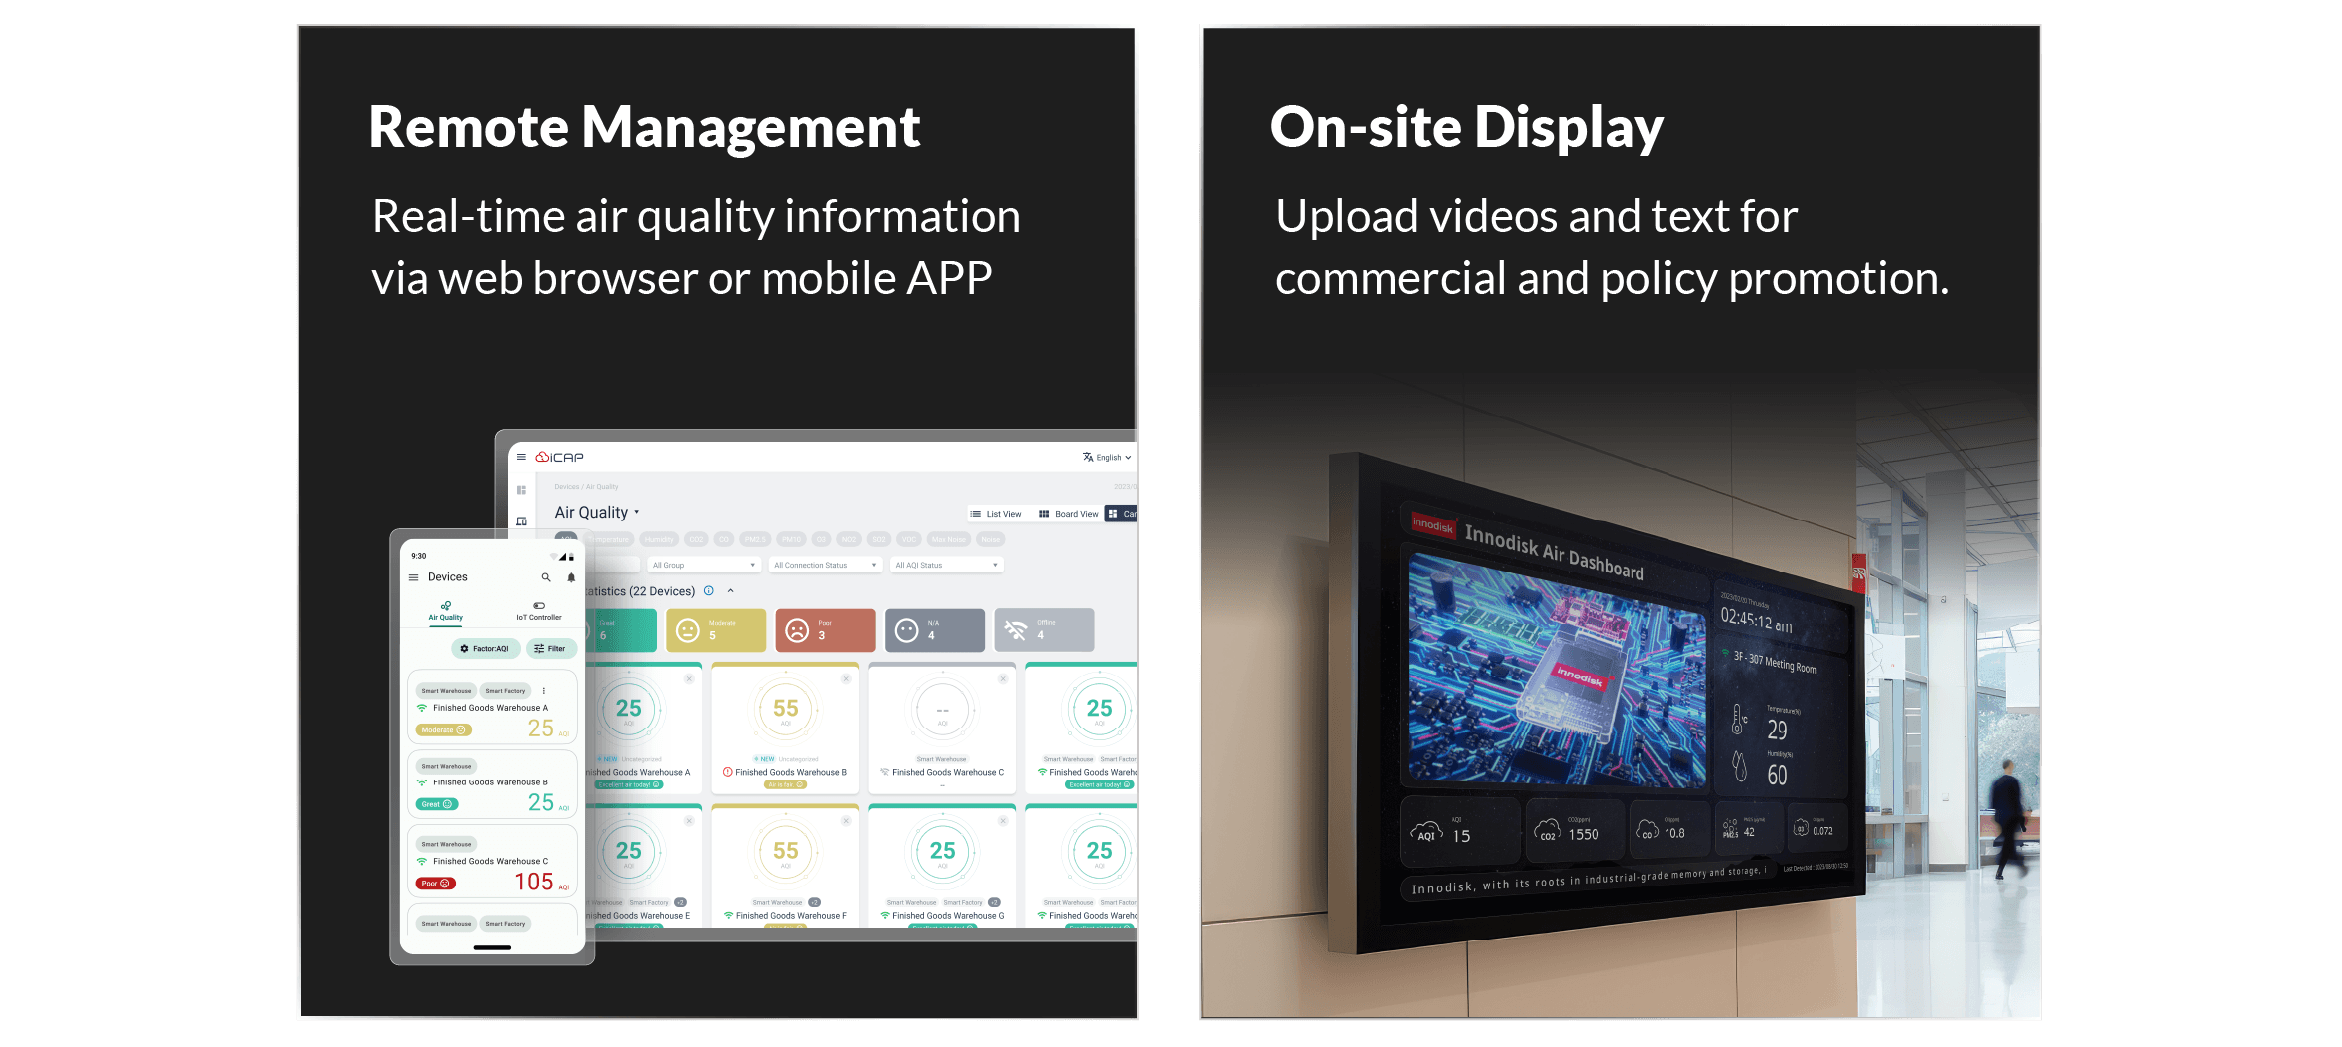 Remote Management/On-site Display